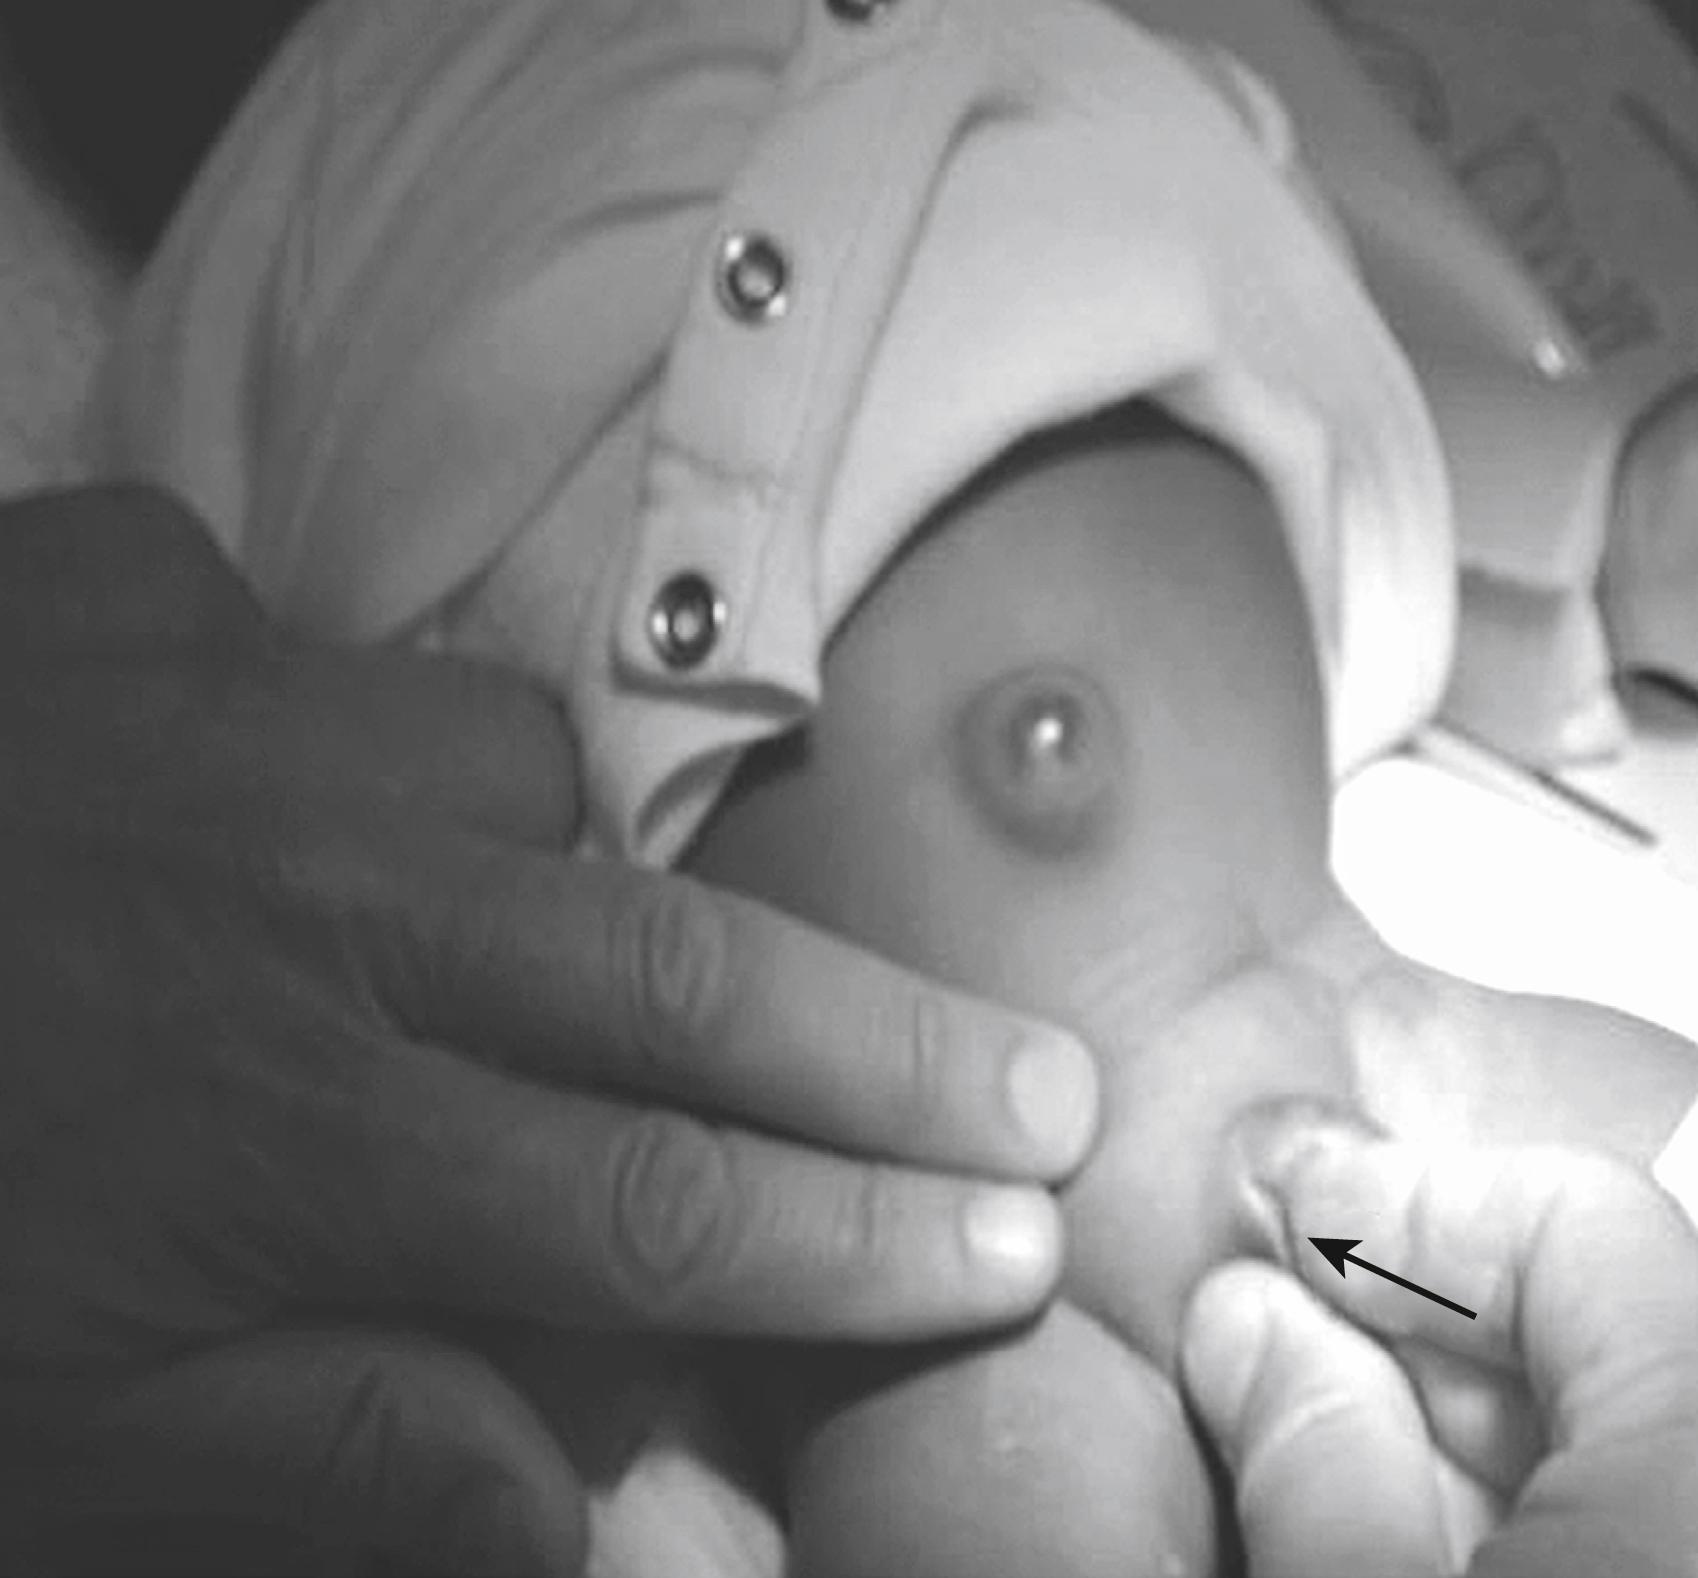 Fig. 52.4, Proper Technique in Reducing an Inguinal Hernia.